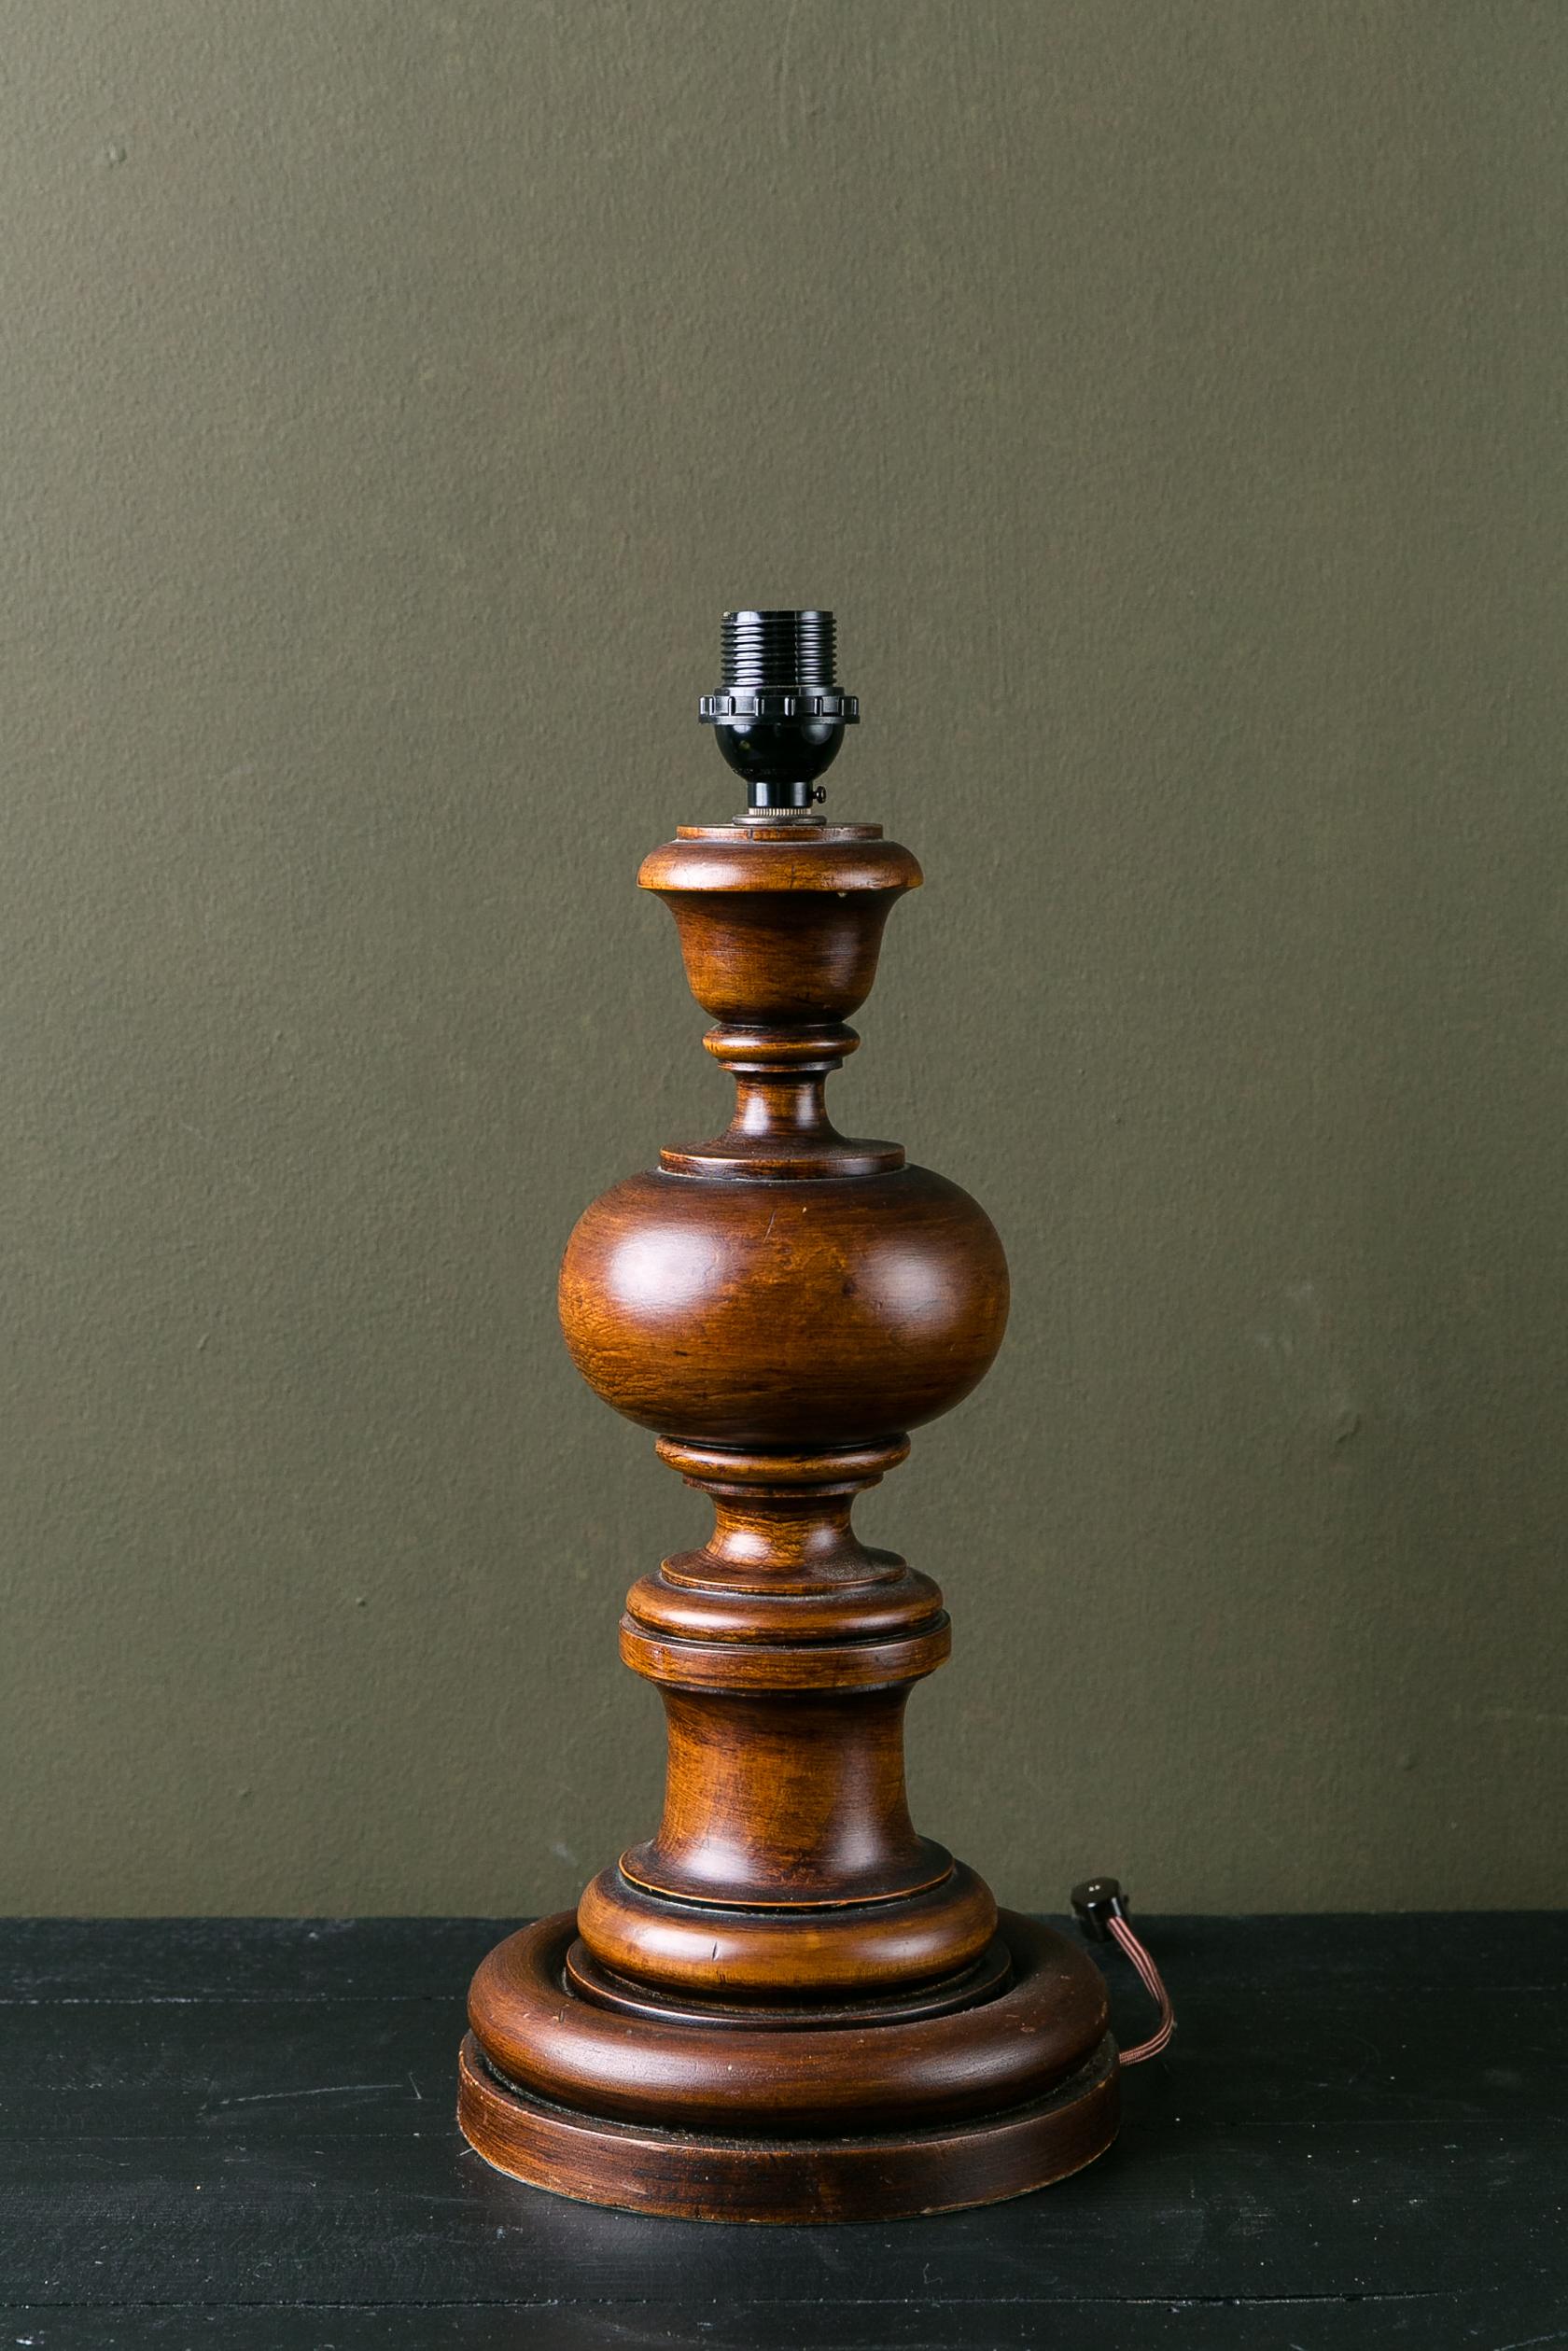 This carved wood lamp was made in Italy but could have come from many different countries. It has been wired in the US using a phenolic socket. The lamp is a classic that could be in a country or city house. The lamp could be American Colonial,